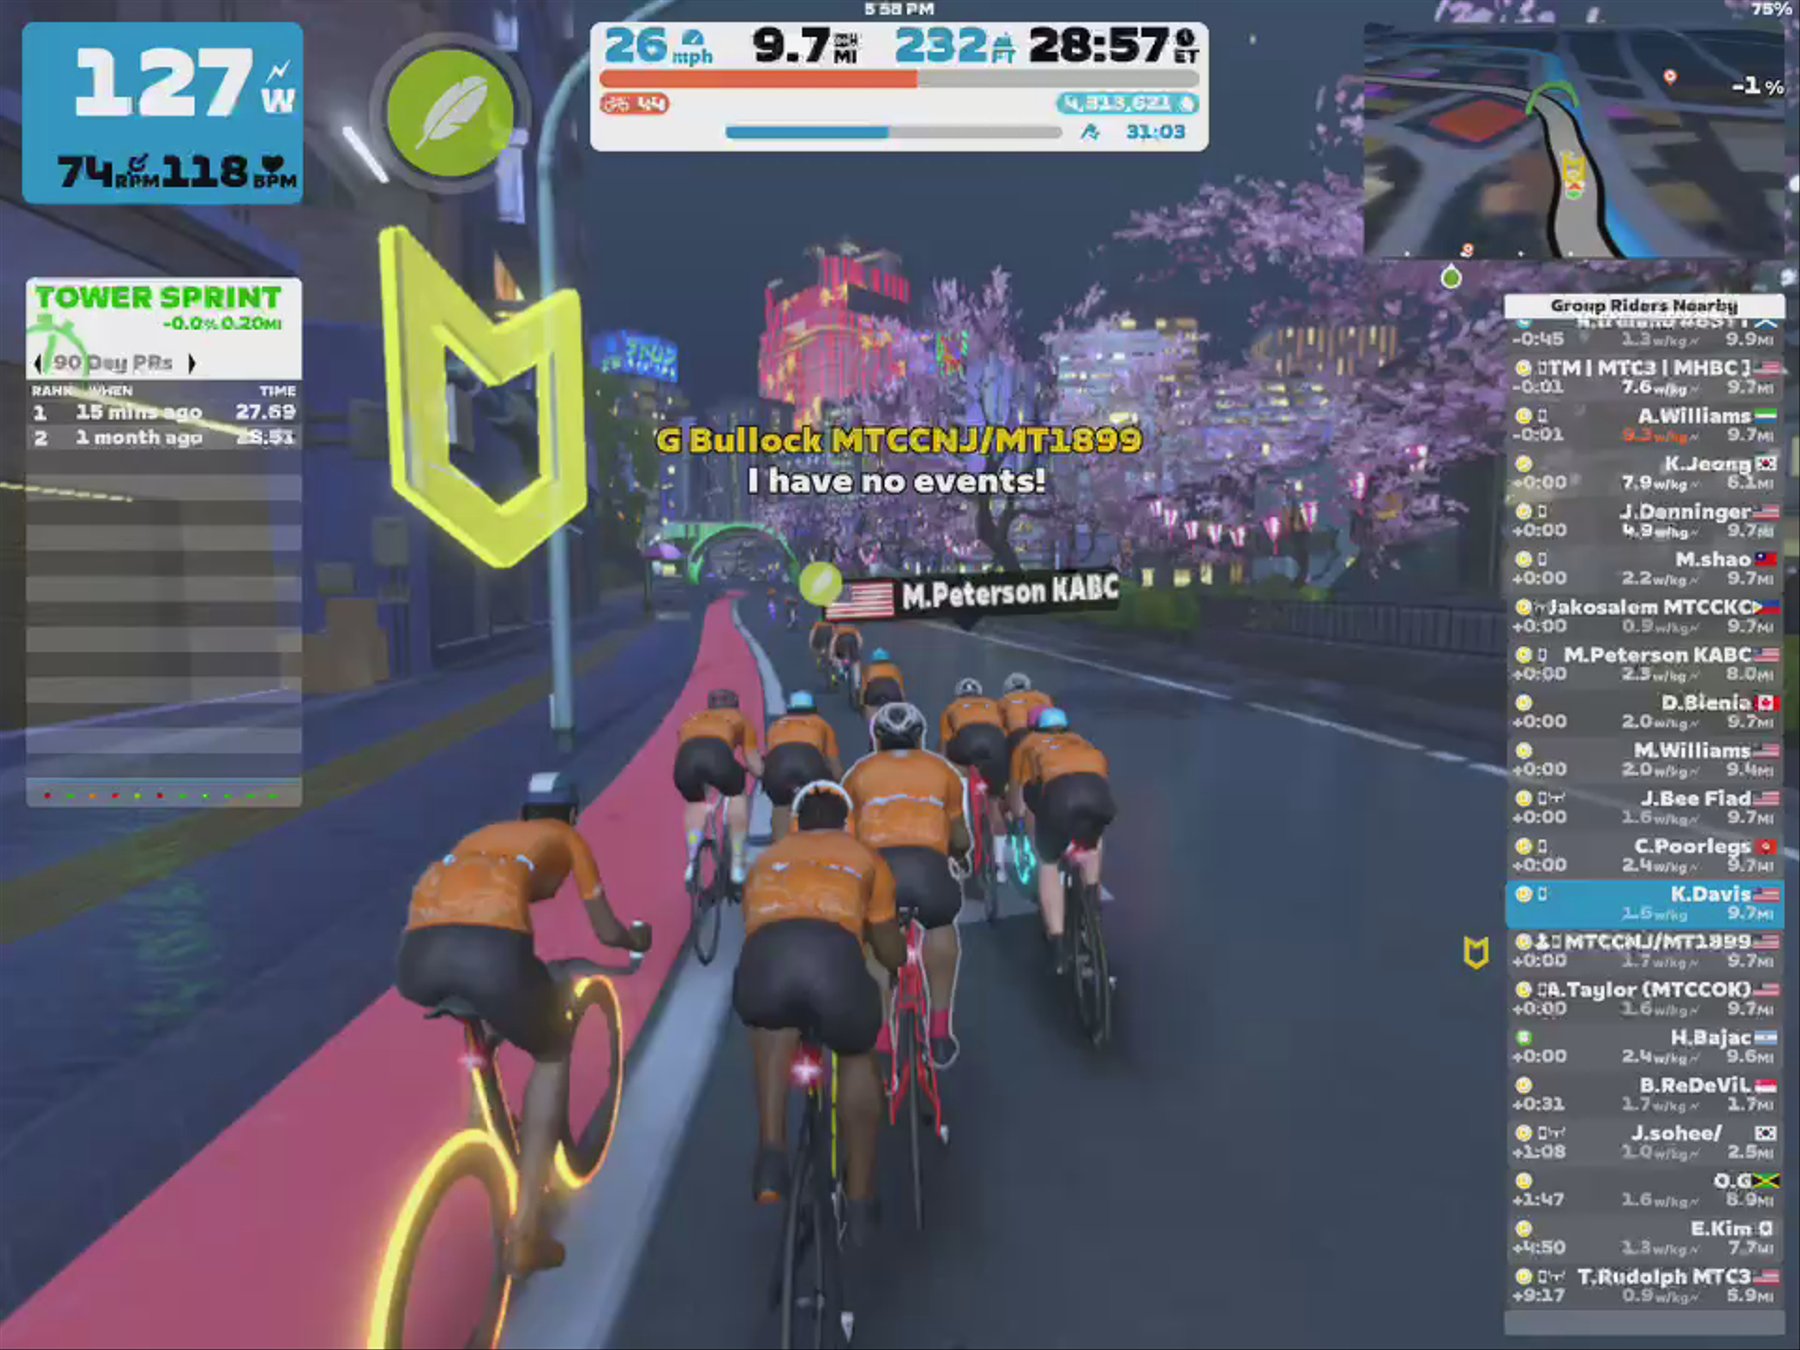 Zwift - Group Ride: Major Taylor 1899 (MT1899) Whirlwind Wednesday (D) on Electric Loop in Makuri Islands